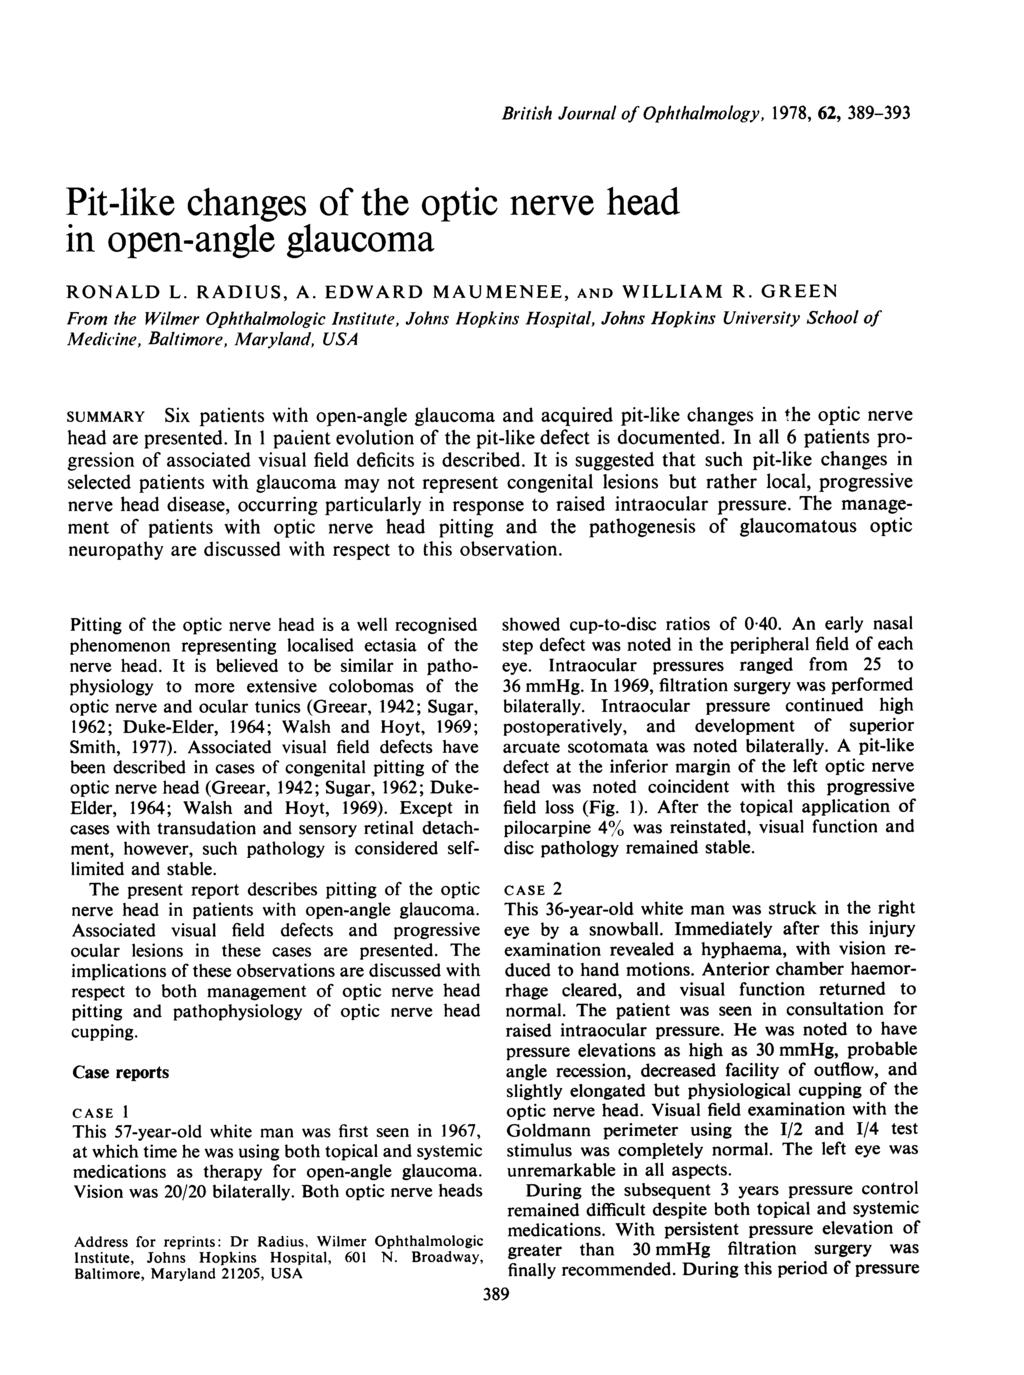 Pit-like changes of the optic nerve head in open-angle glaucoma British Journal of Ophthalmology, 1978, 62, 389-393 RONALD L. RADIUS, A. EDWARD MAUMENEE, AND WILLIAM R.